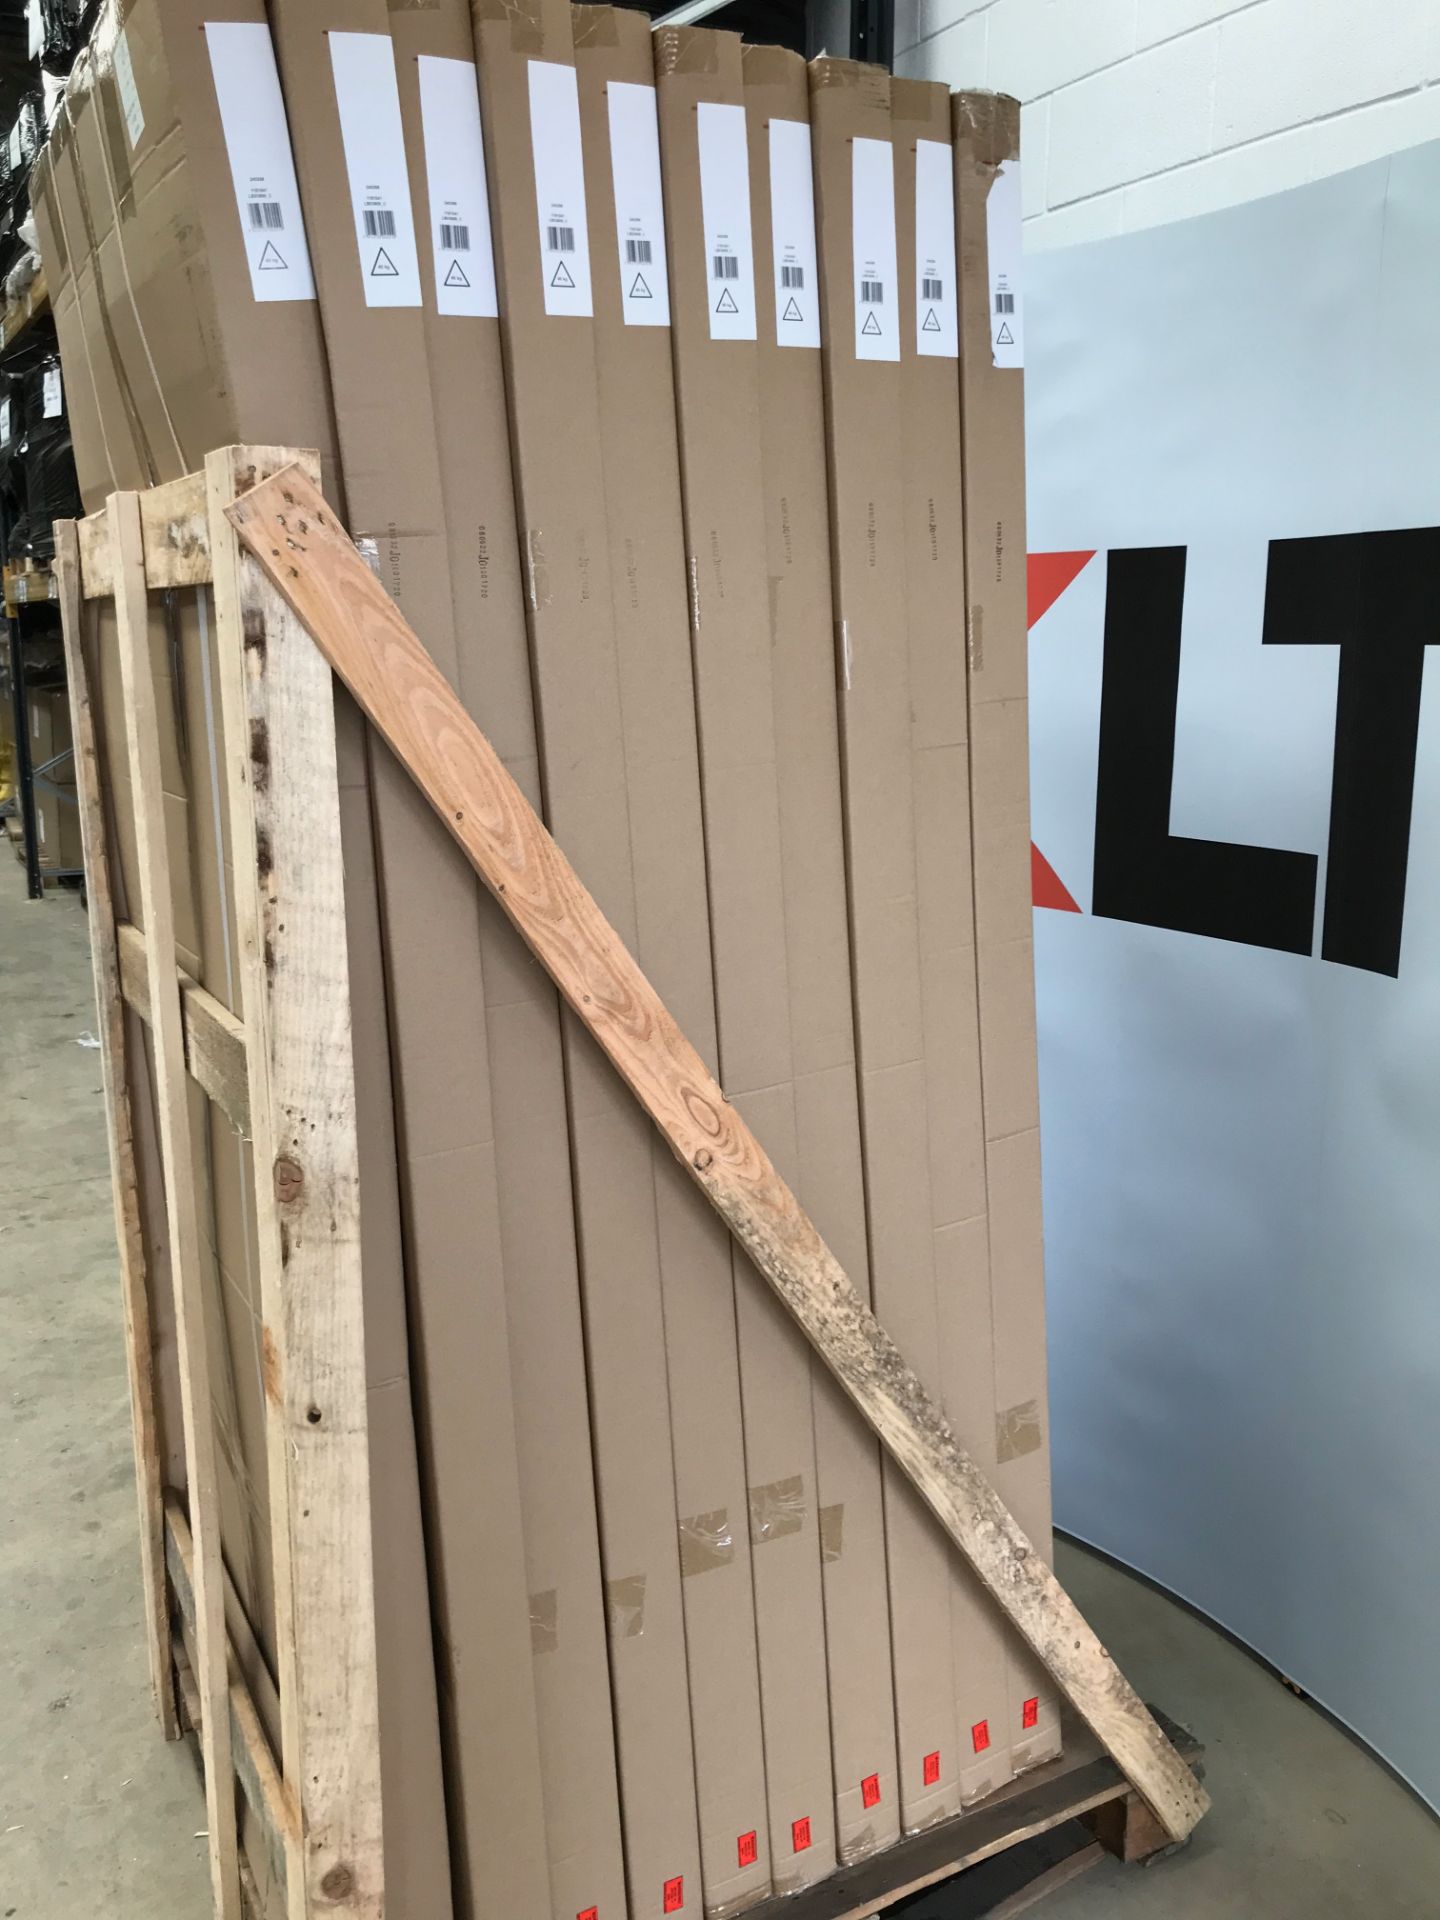 857-9 | 10 x SHOWER ENCLOSURE HINGE 900X900MM PIVOT C RRP of Pallet - £2839.9 Delivery charged at £